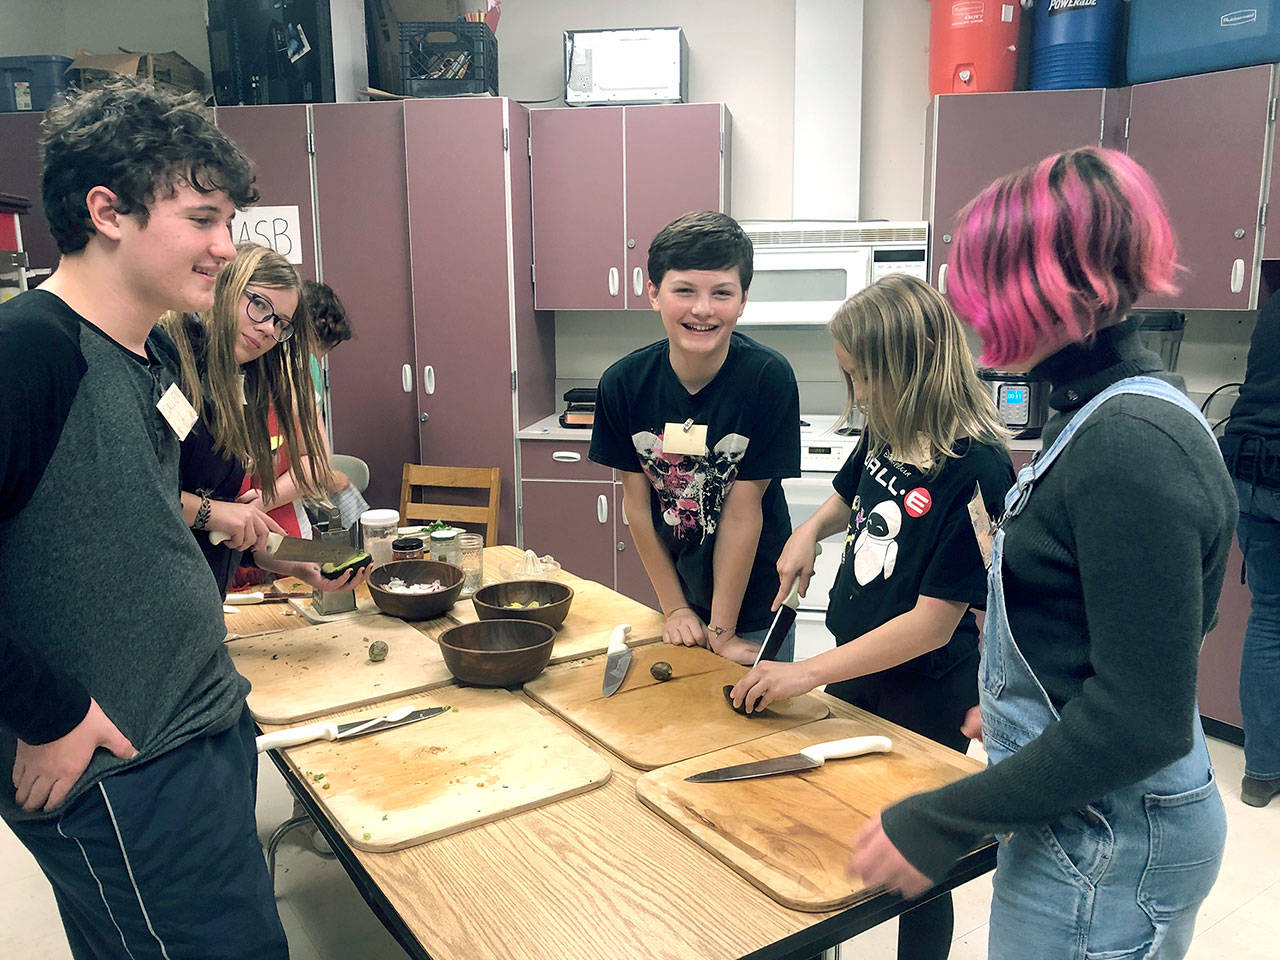 Students at Blue Heron Middle School participate in a cooking class put on by the Food Co-op. Pictured are Callen Johnson, left, Samara Kingfisher, Cadin Keever, Eden Jackson, and Sage Brotherton. (Zach Jablonski | Peninsula Daily News)